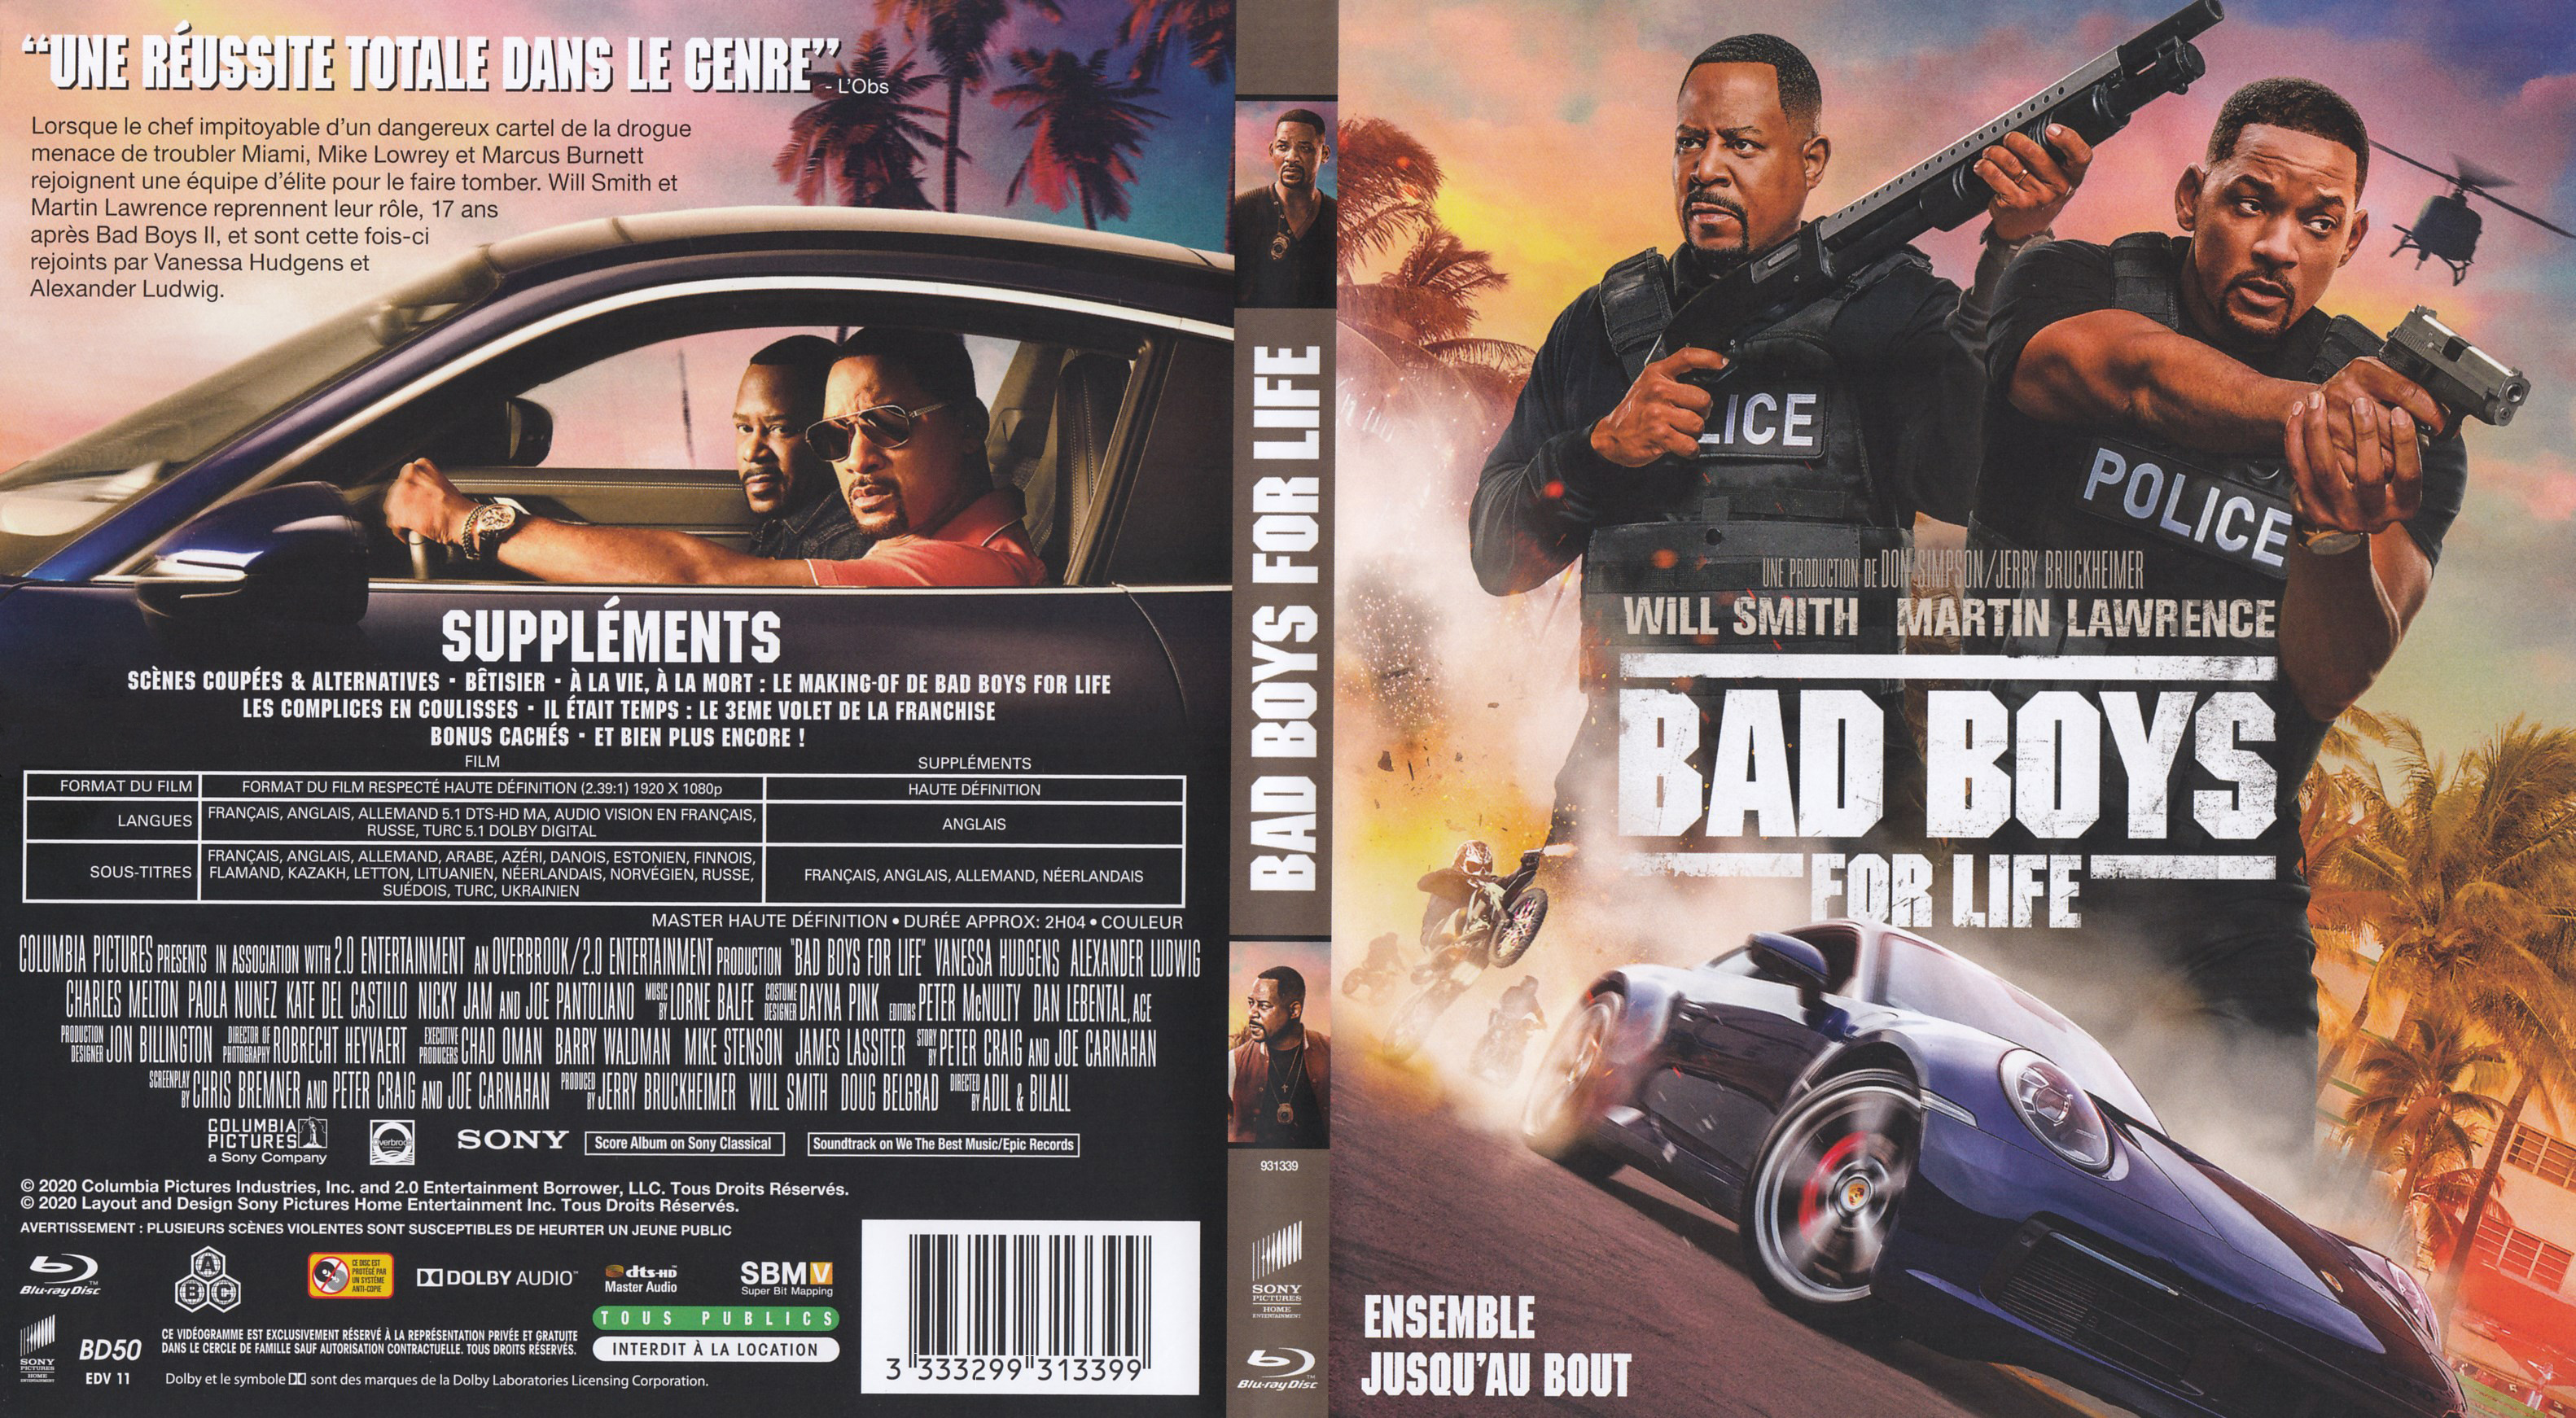 Jaquette DVD Bad boys for life (BLU-RAY)